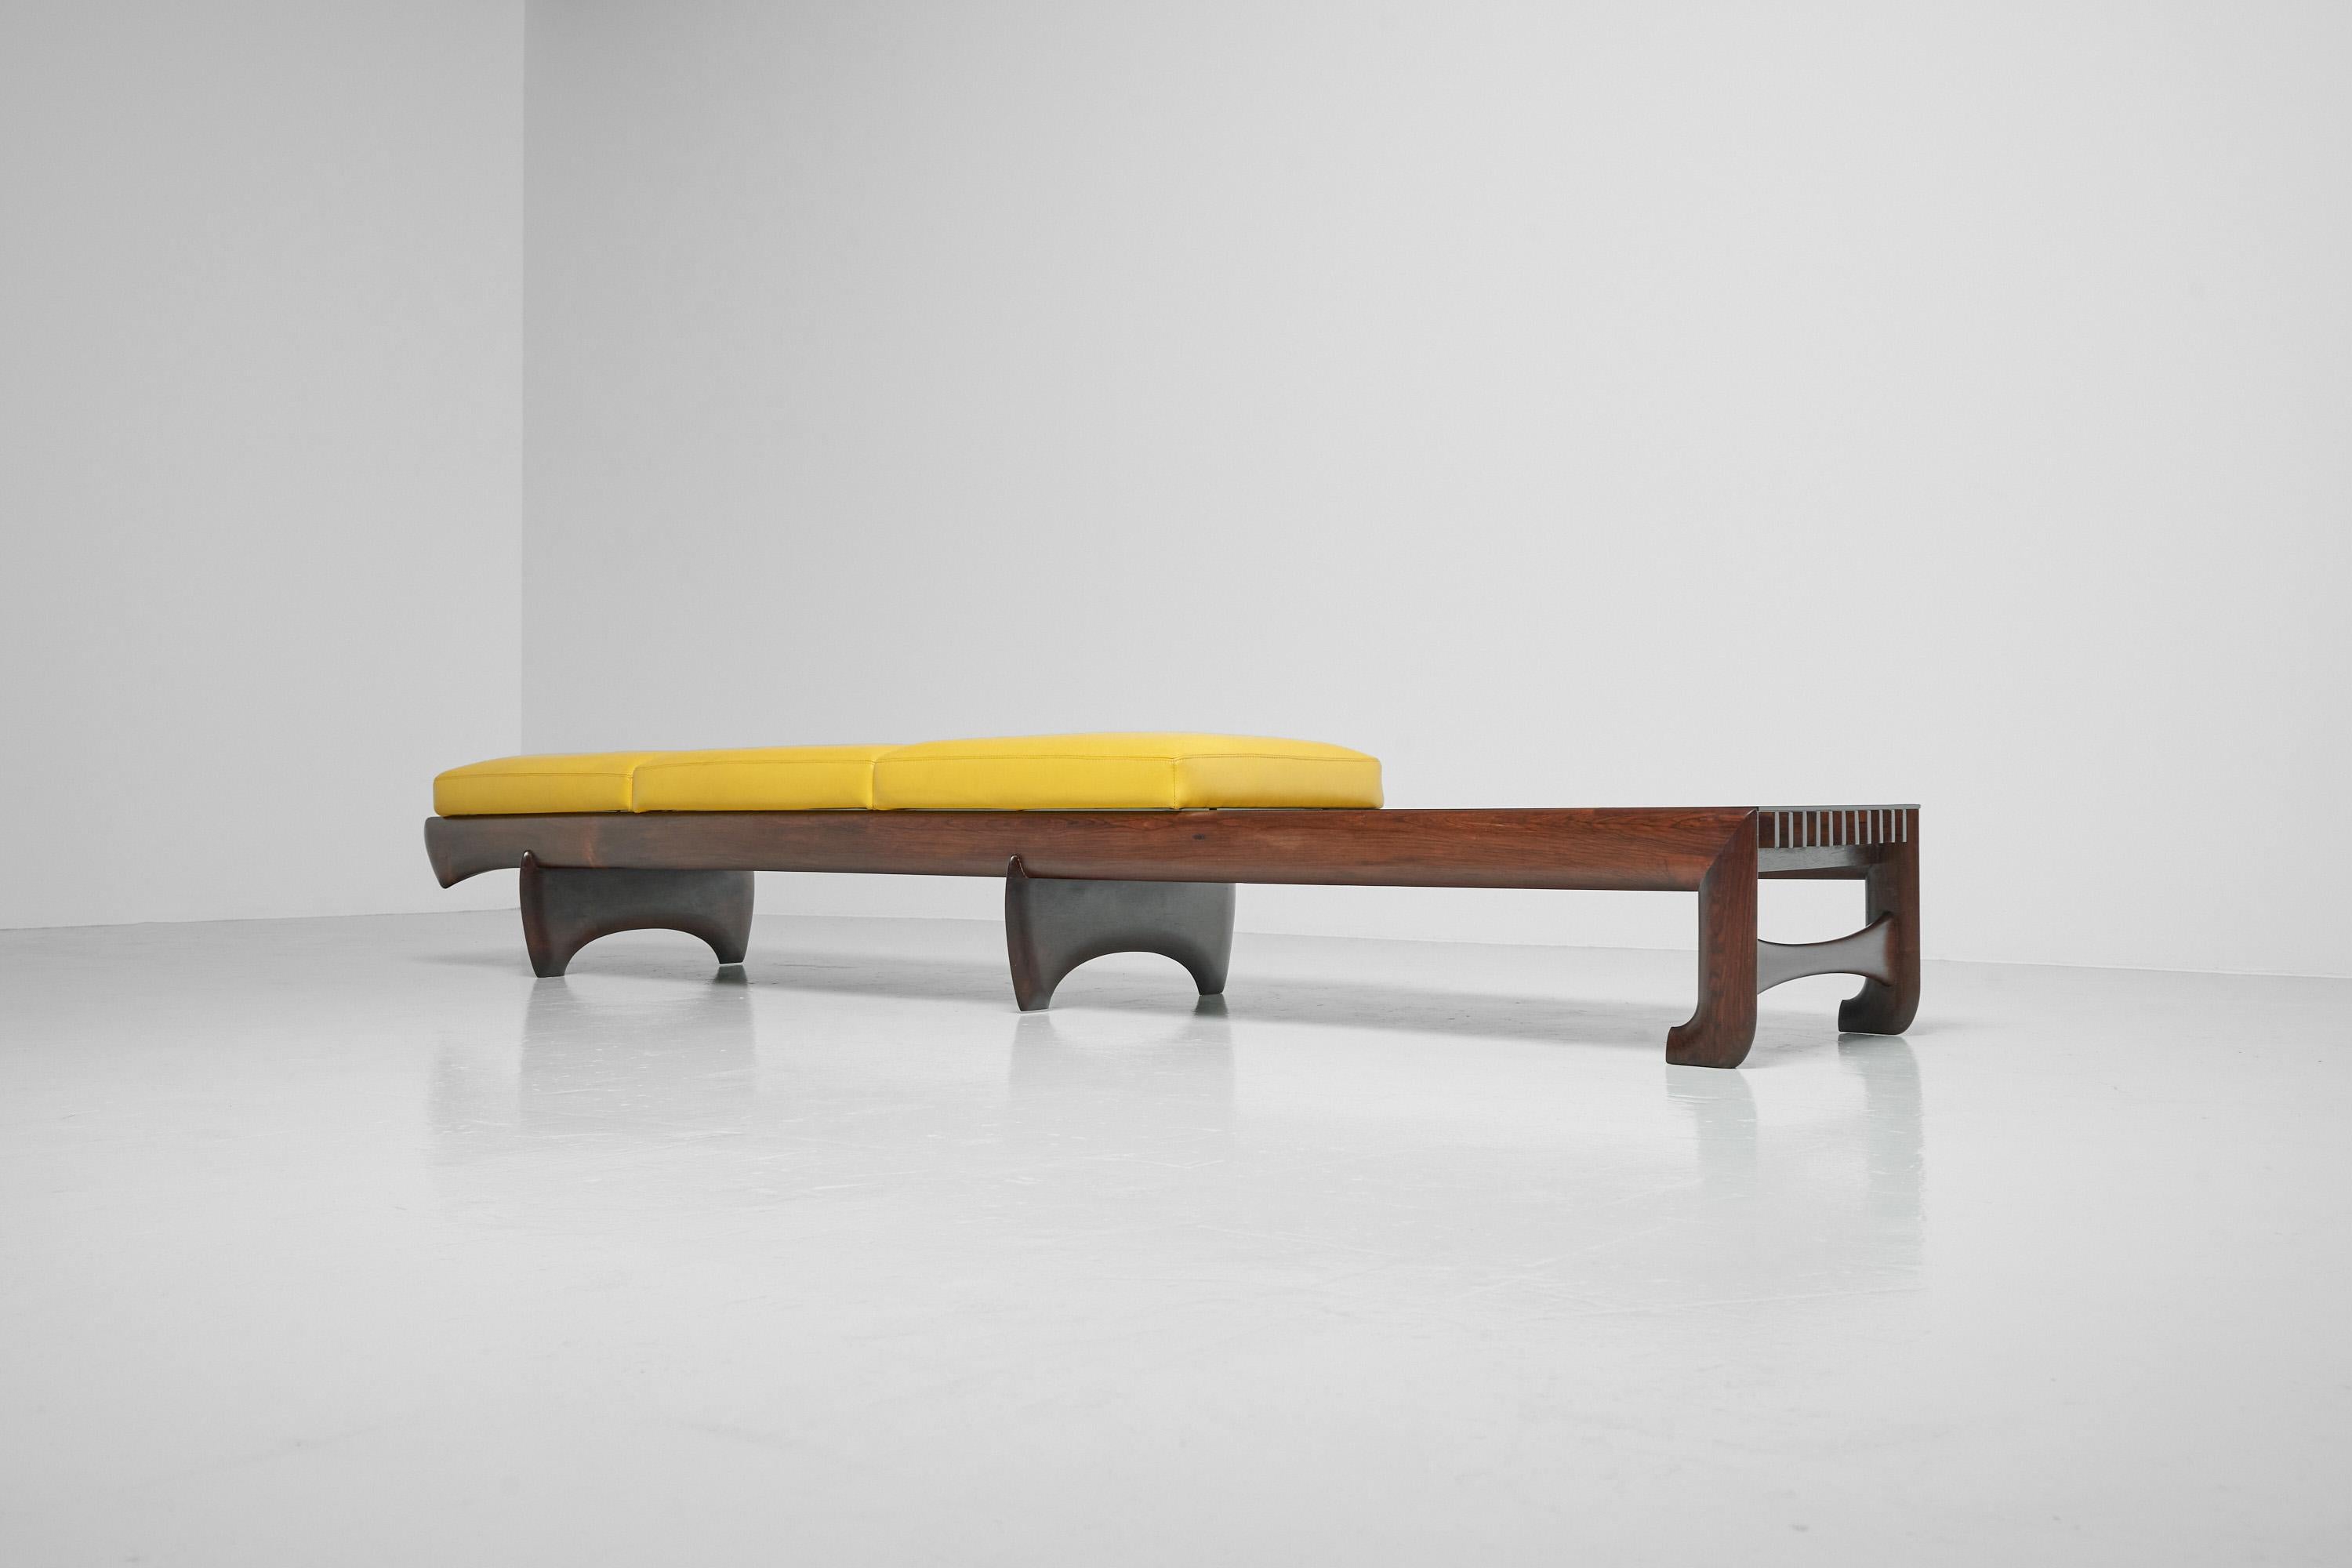 Eye catching unique long bench with integrated side table made by an unknown architect in Brazil in the 1960s. This solid rosewood bench has been surely inspired by Sergio Rodrigues and Carlo Hauner / Martin Eisler. It has features in the design